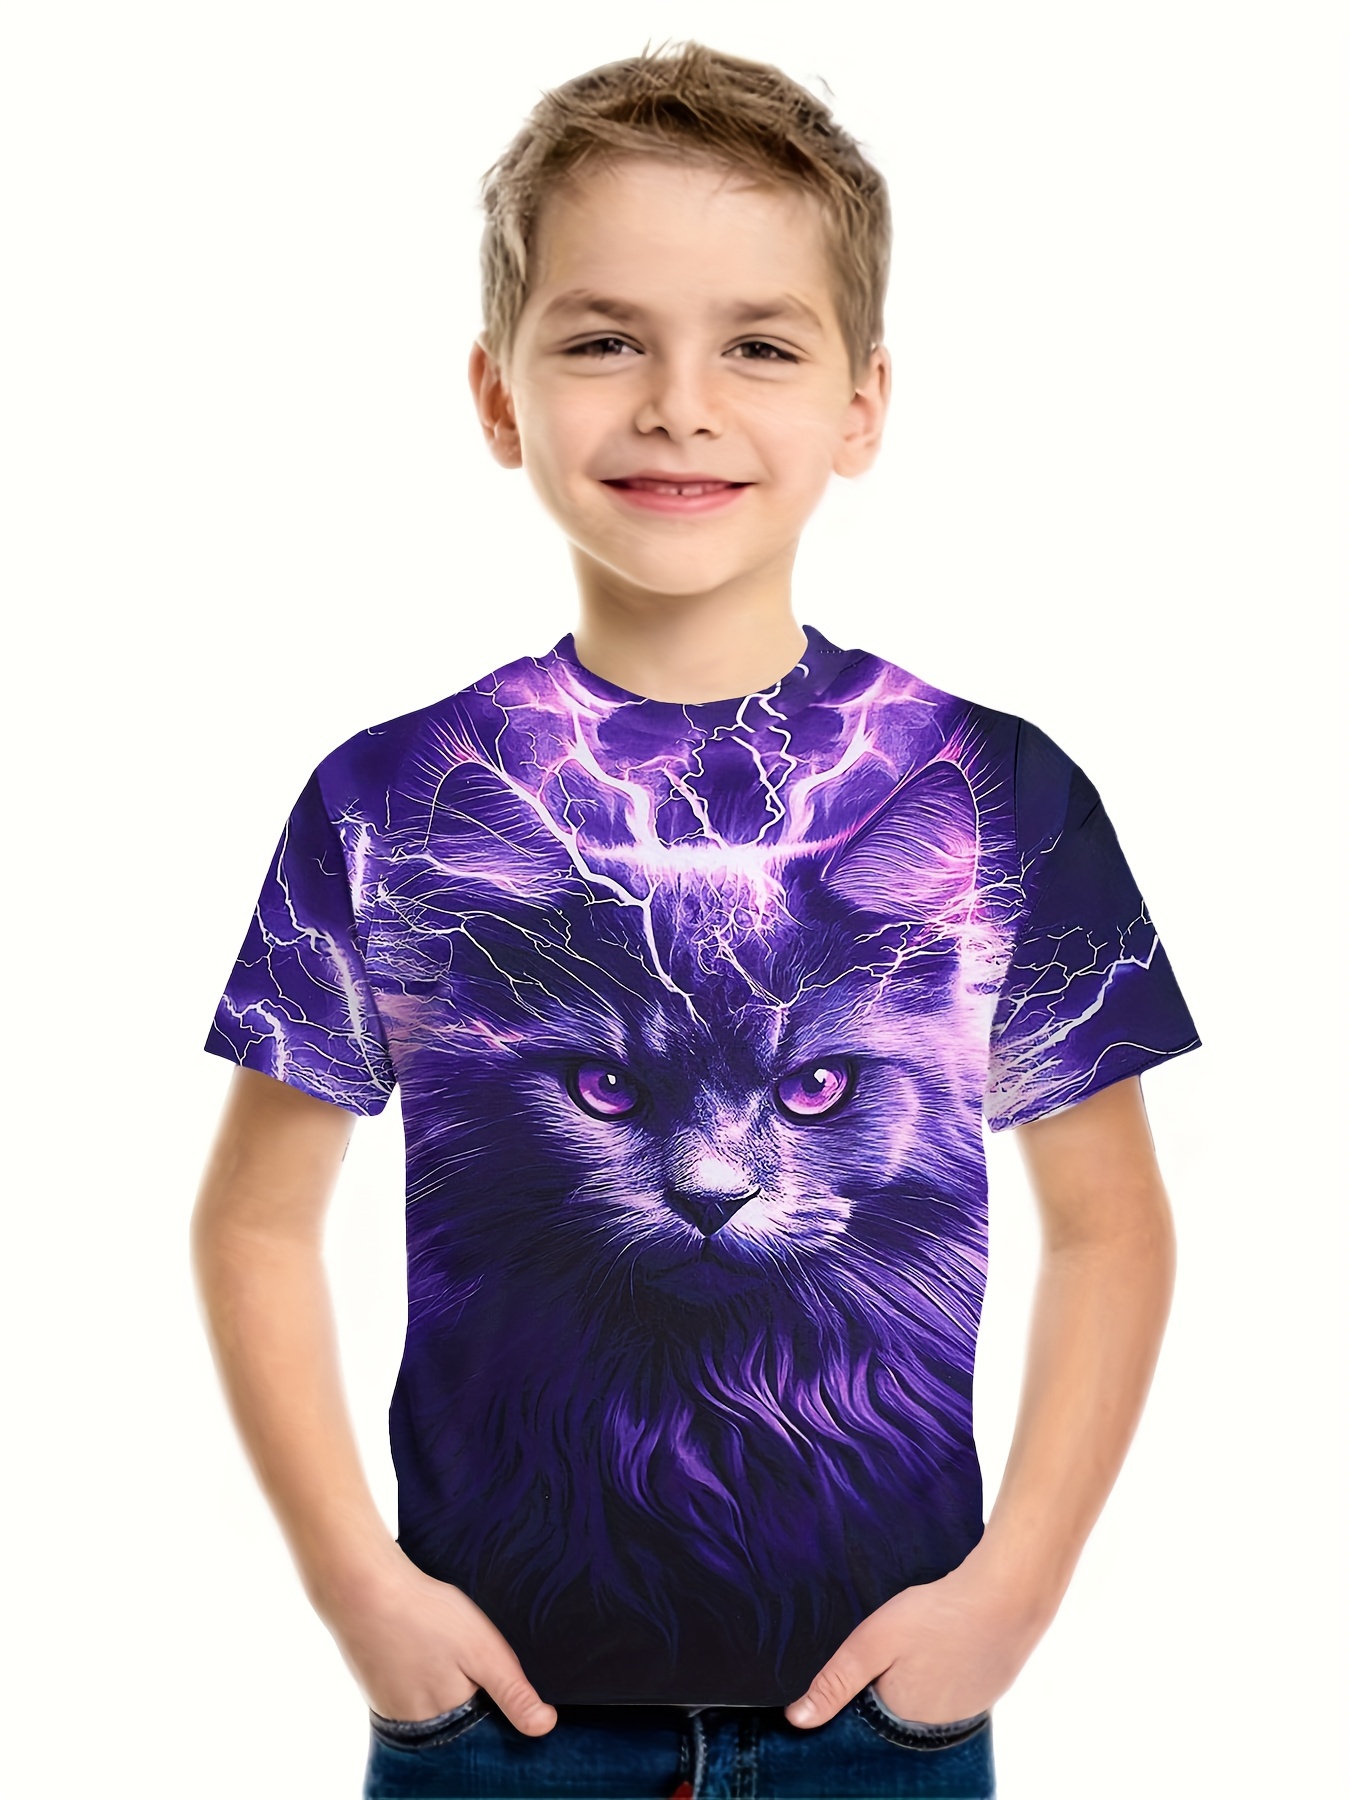  Boys Neon Shirts Size 10-12 Kids T-Shirt Novelty  Graphic-Print 3D Tees Funny Tops Summer Short Sleeve Outfits Size 12-14  Years